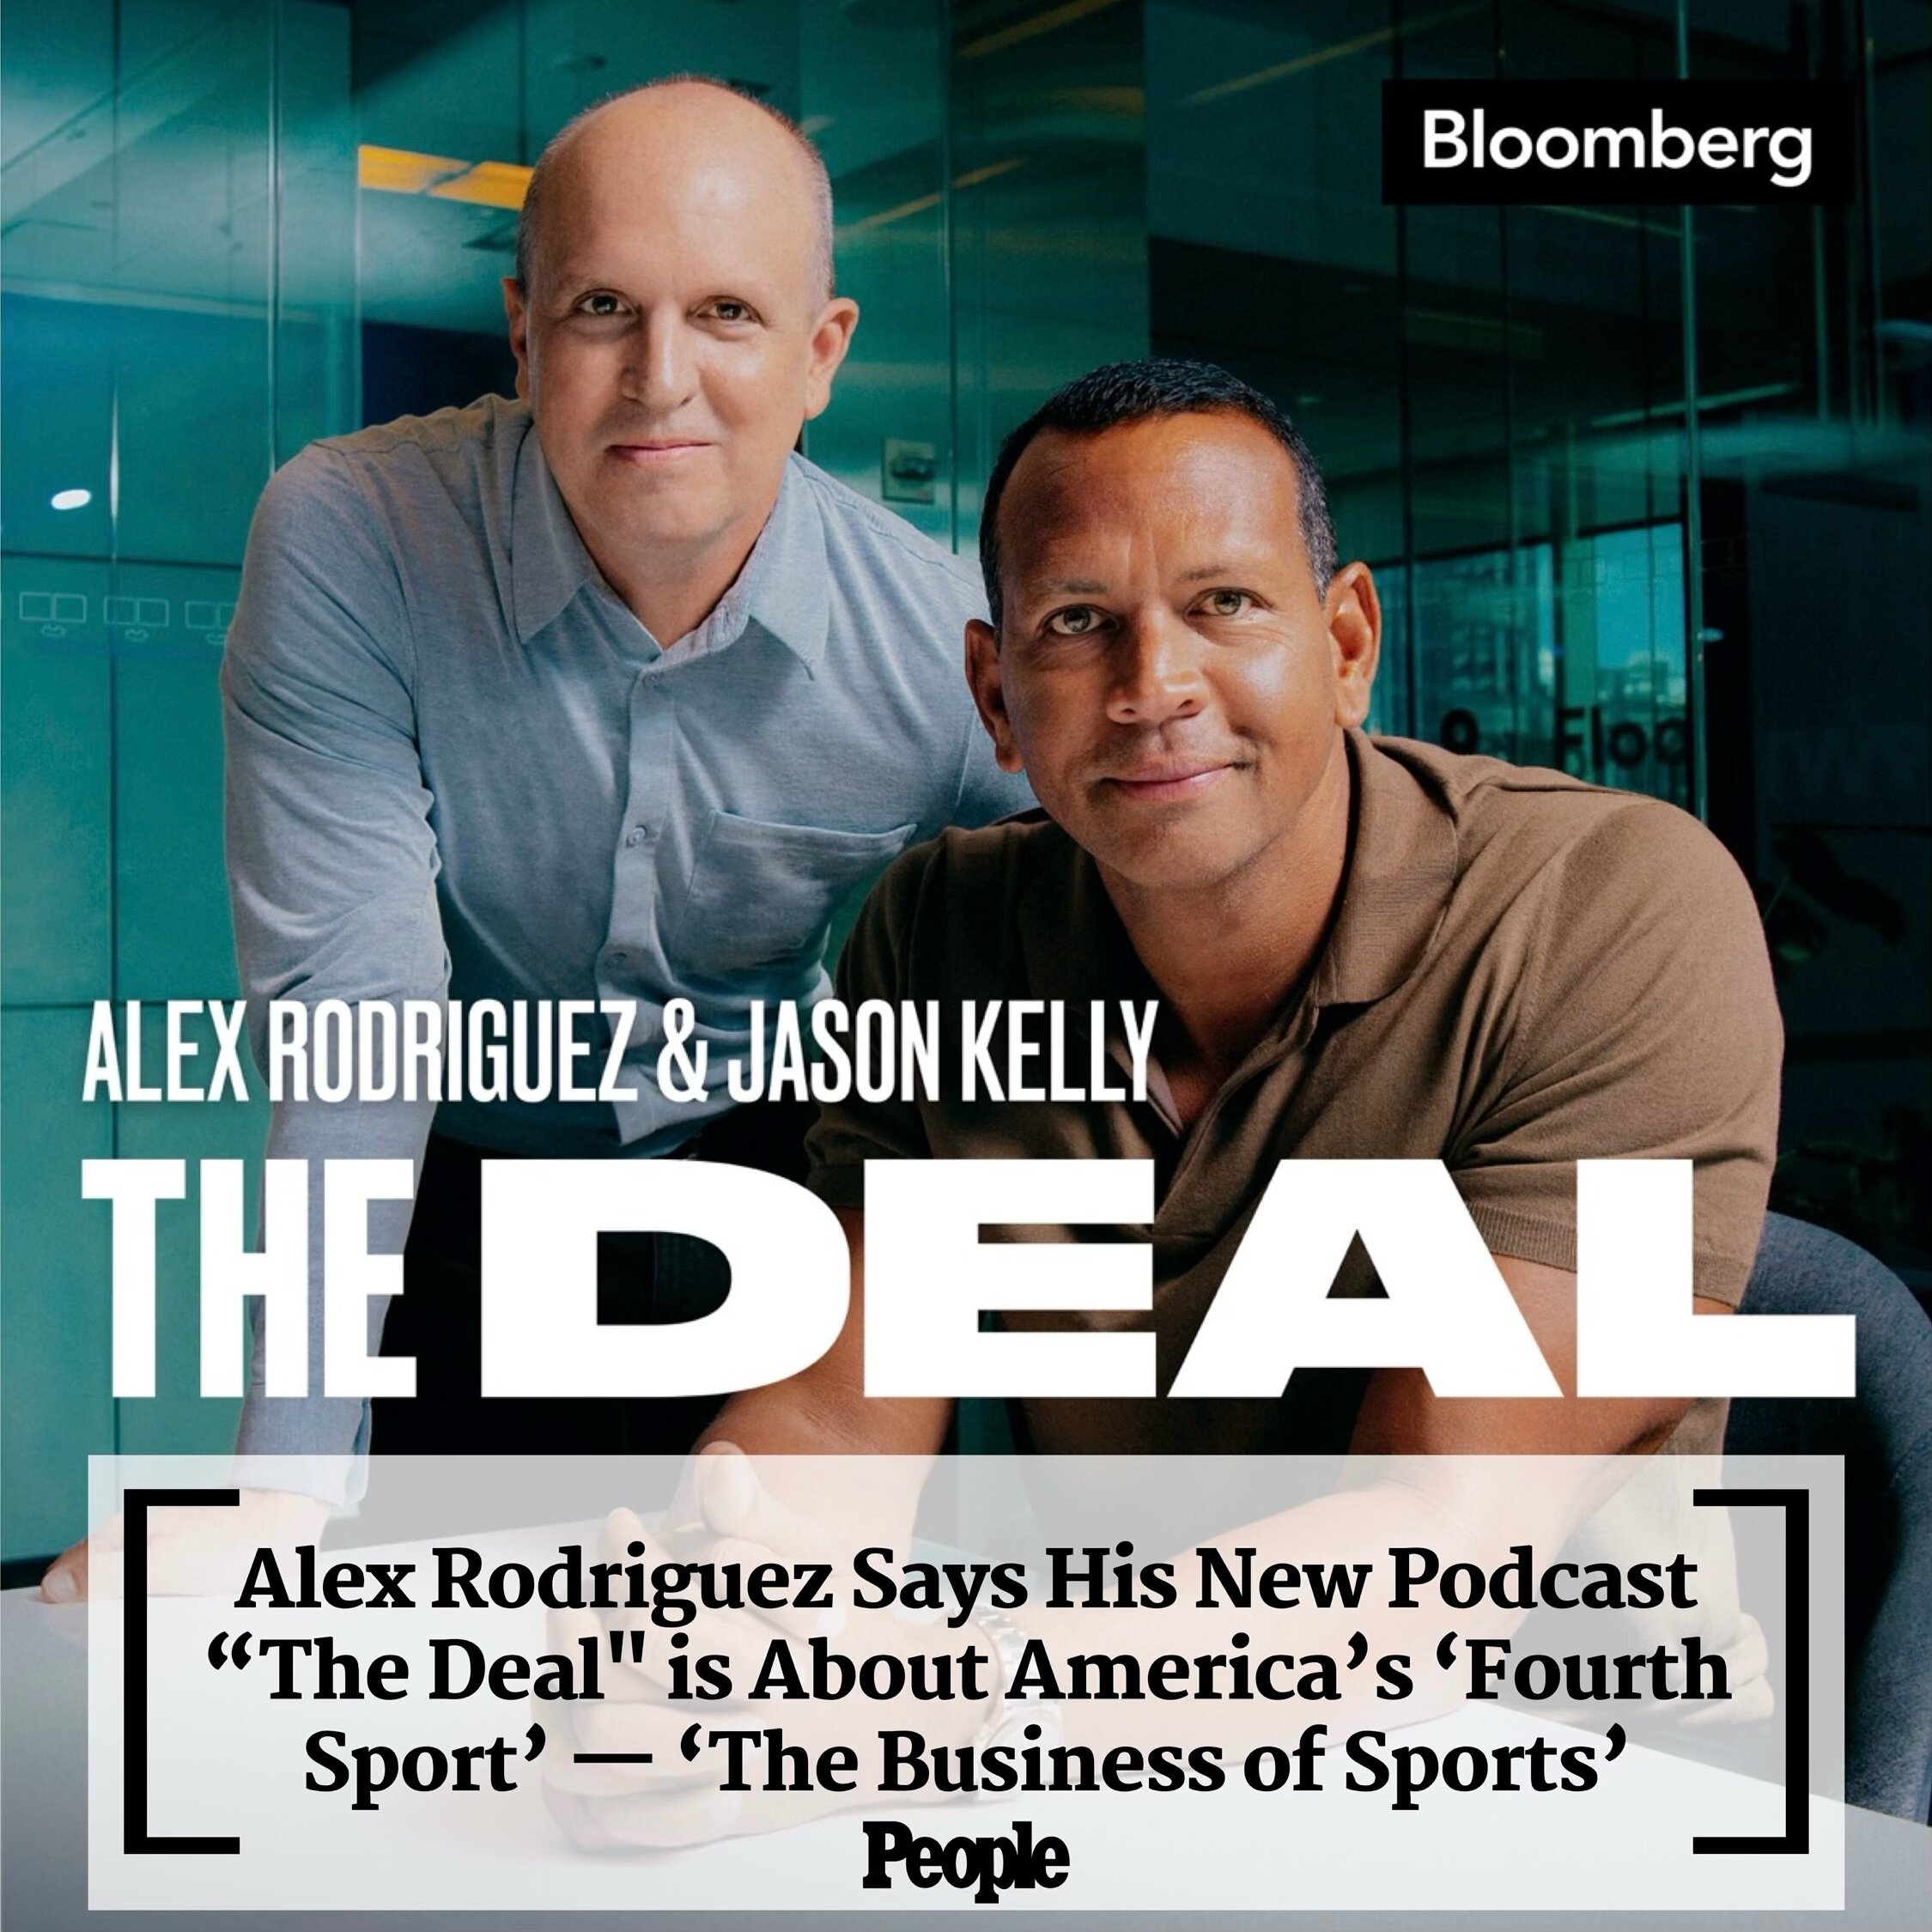 A-Rod spoke to @people today about his new @bloombergoriginals podcast &ldquo;The Deal&rdquo; with Jason Kelly, powered by our client @Bloomberg. The series premiere is available now on the Bloomberg app or wherever you get your podcasts.🎙